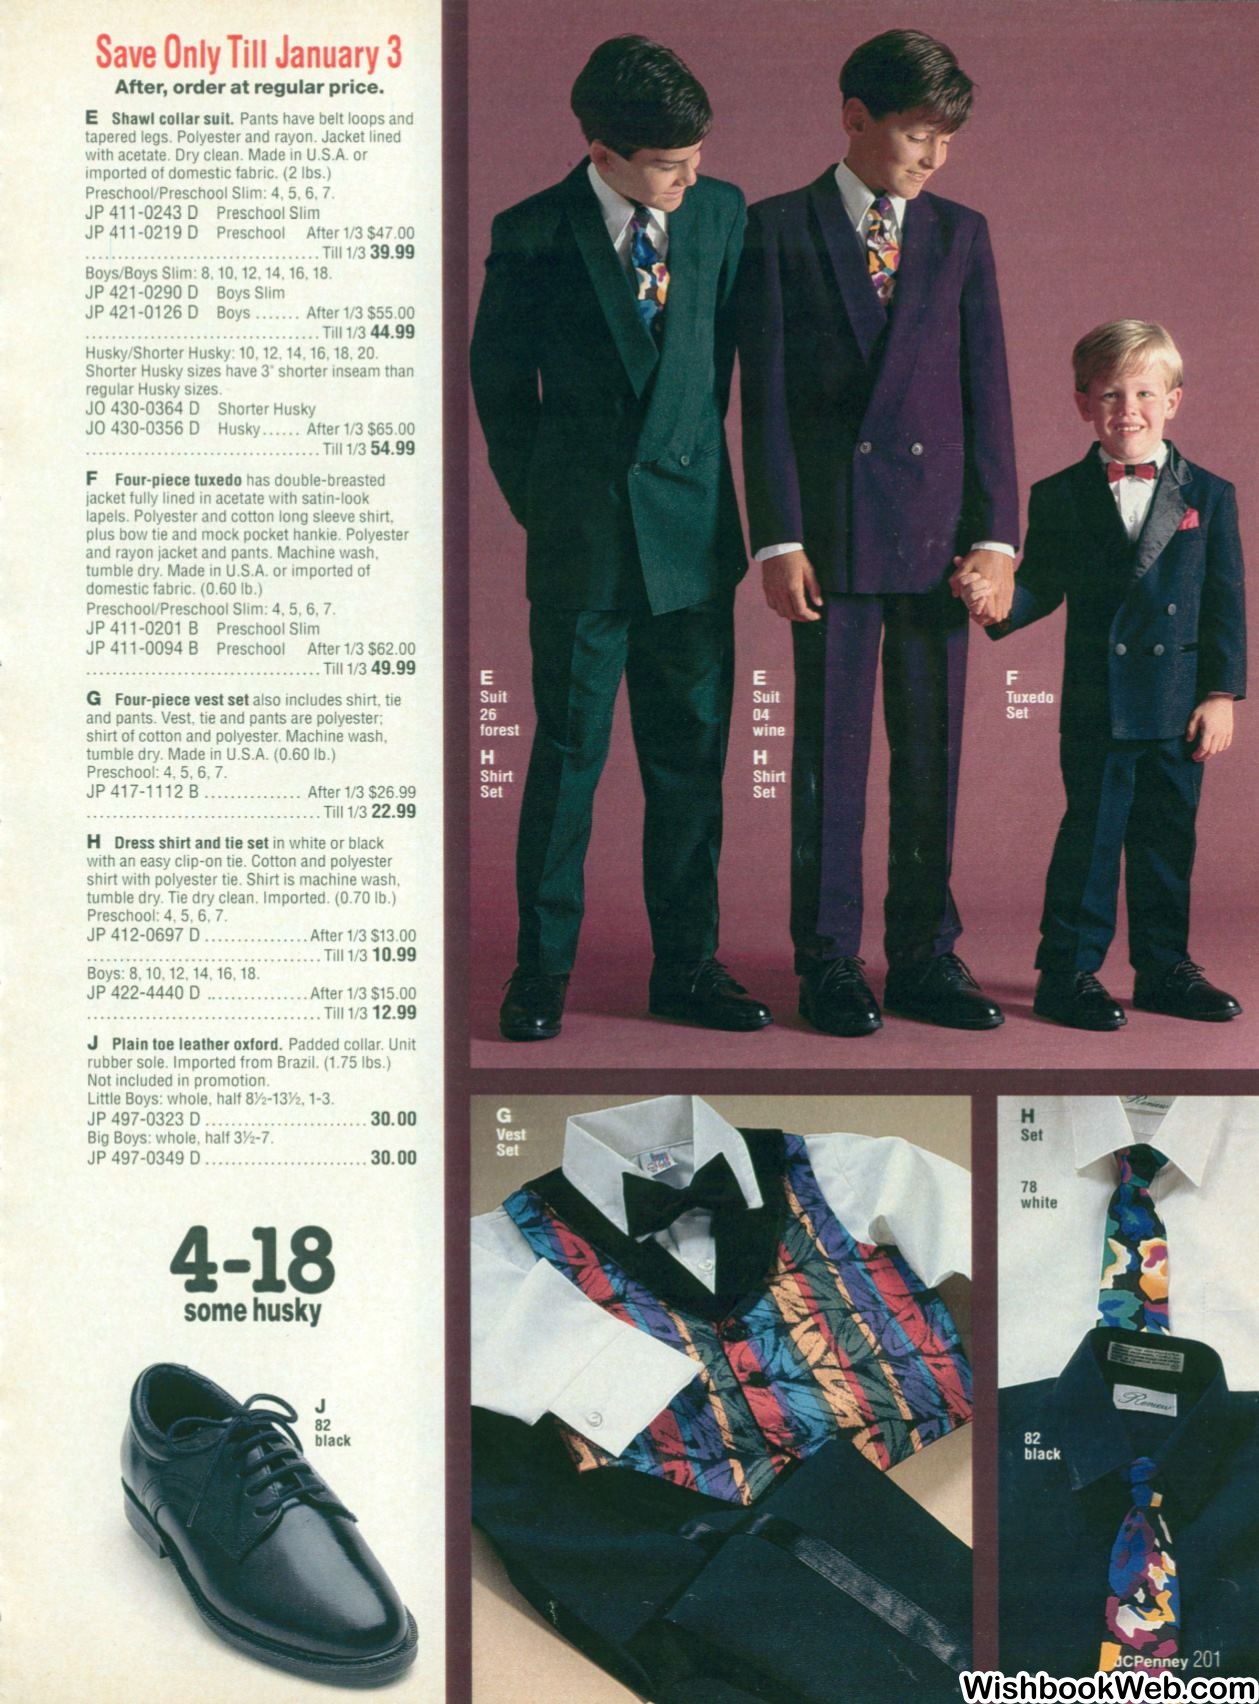 25 Pages Of The 1994 JC Penny Catalog That Will Make You Feel Like You Traveled Through Time